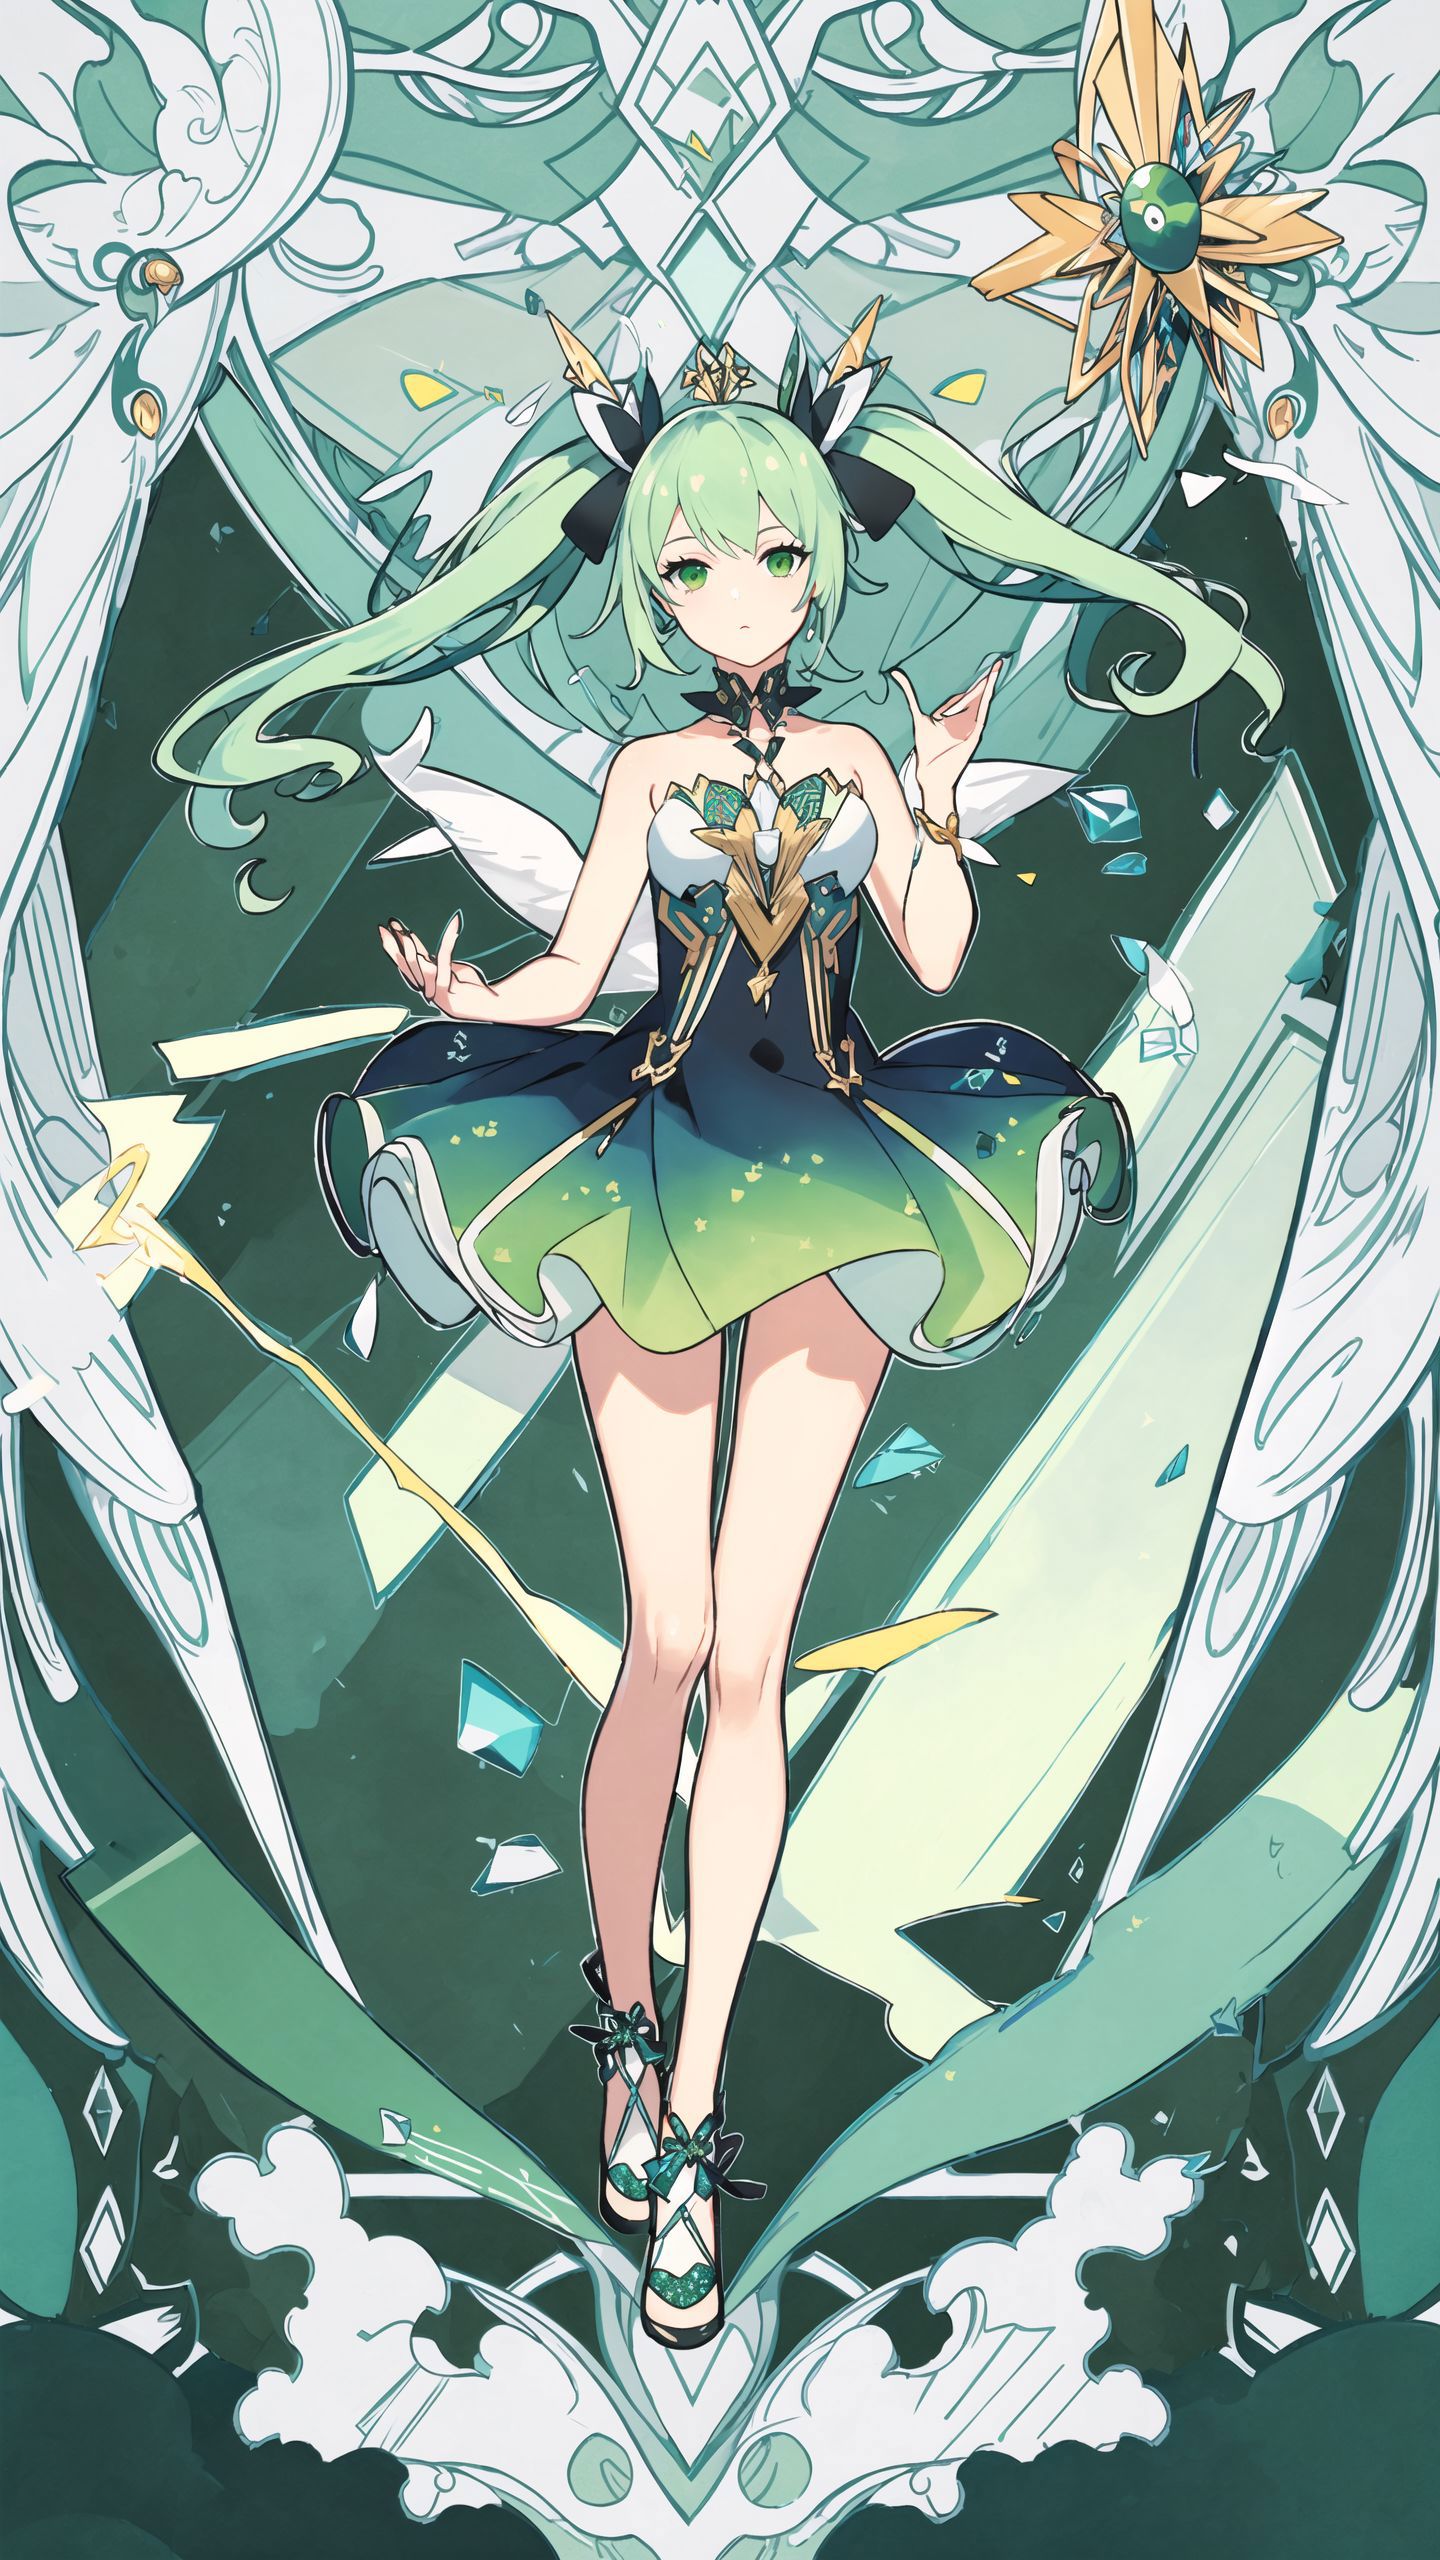 A magical anime girl in a green dress stands in front of a backdrop of broken glass.